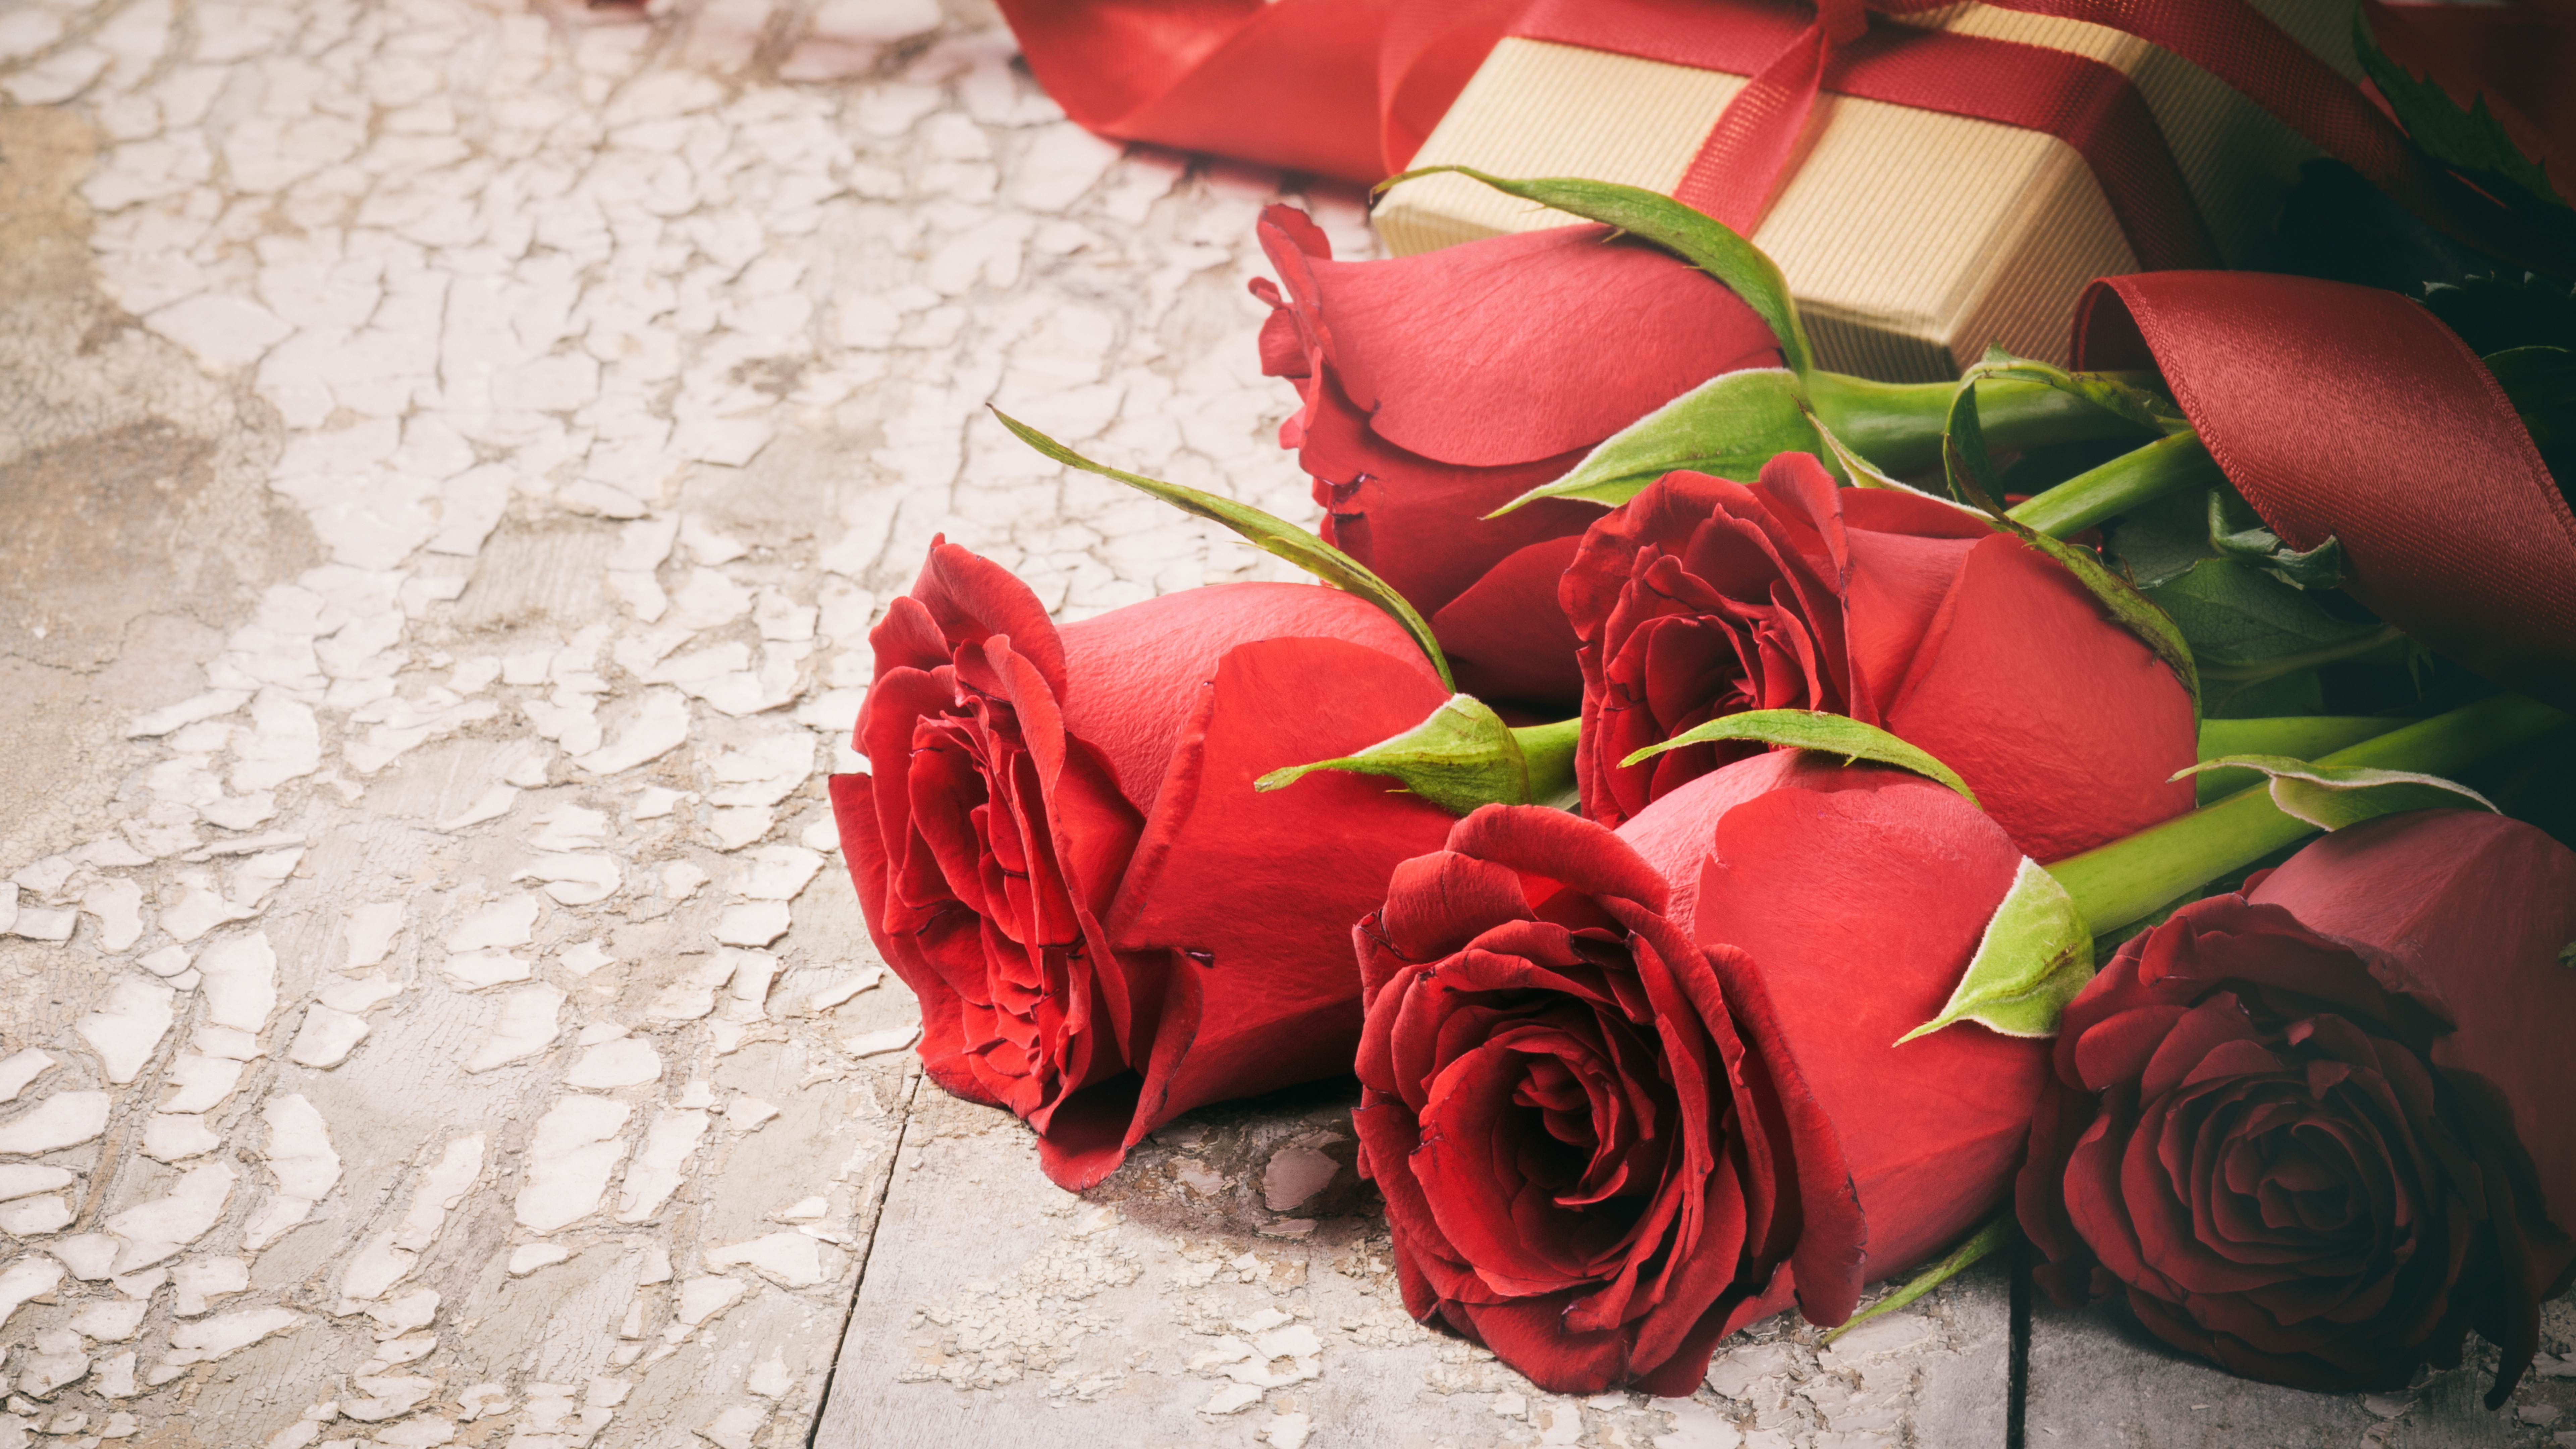 Red Roses on White Textile. Wallpaper in 7680x4320 Resolution